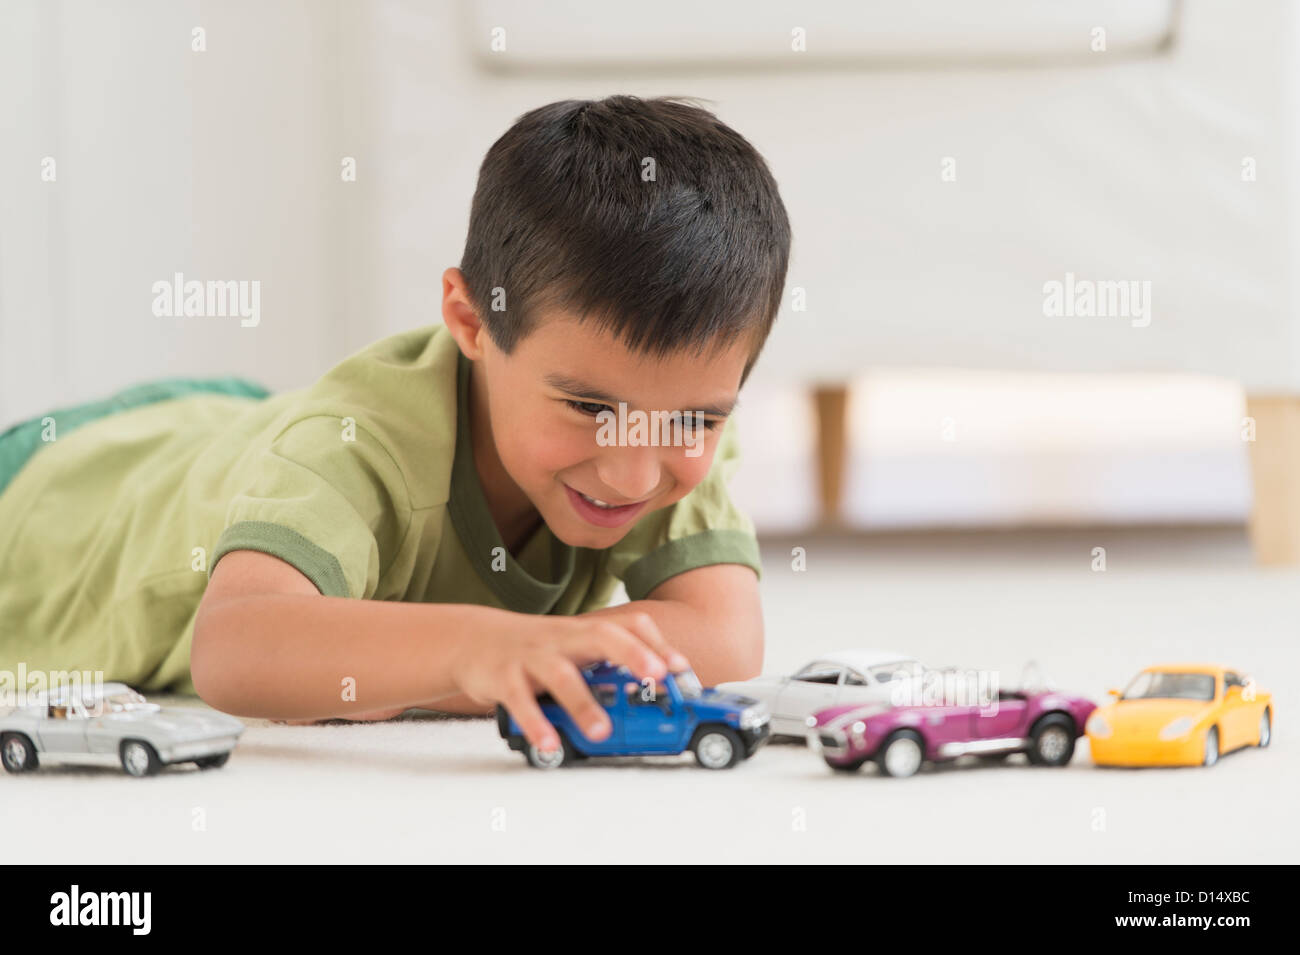 USA, New Jersey, Jersey City, Portrait of boy (6-7) playing with toy cars Stock Photo